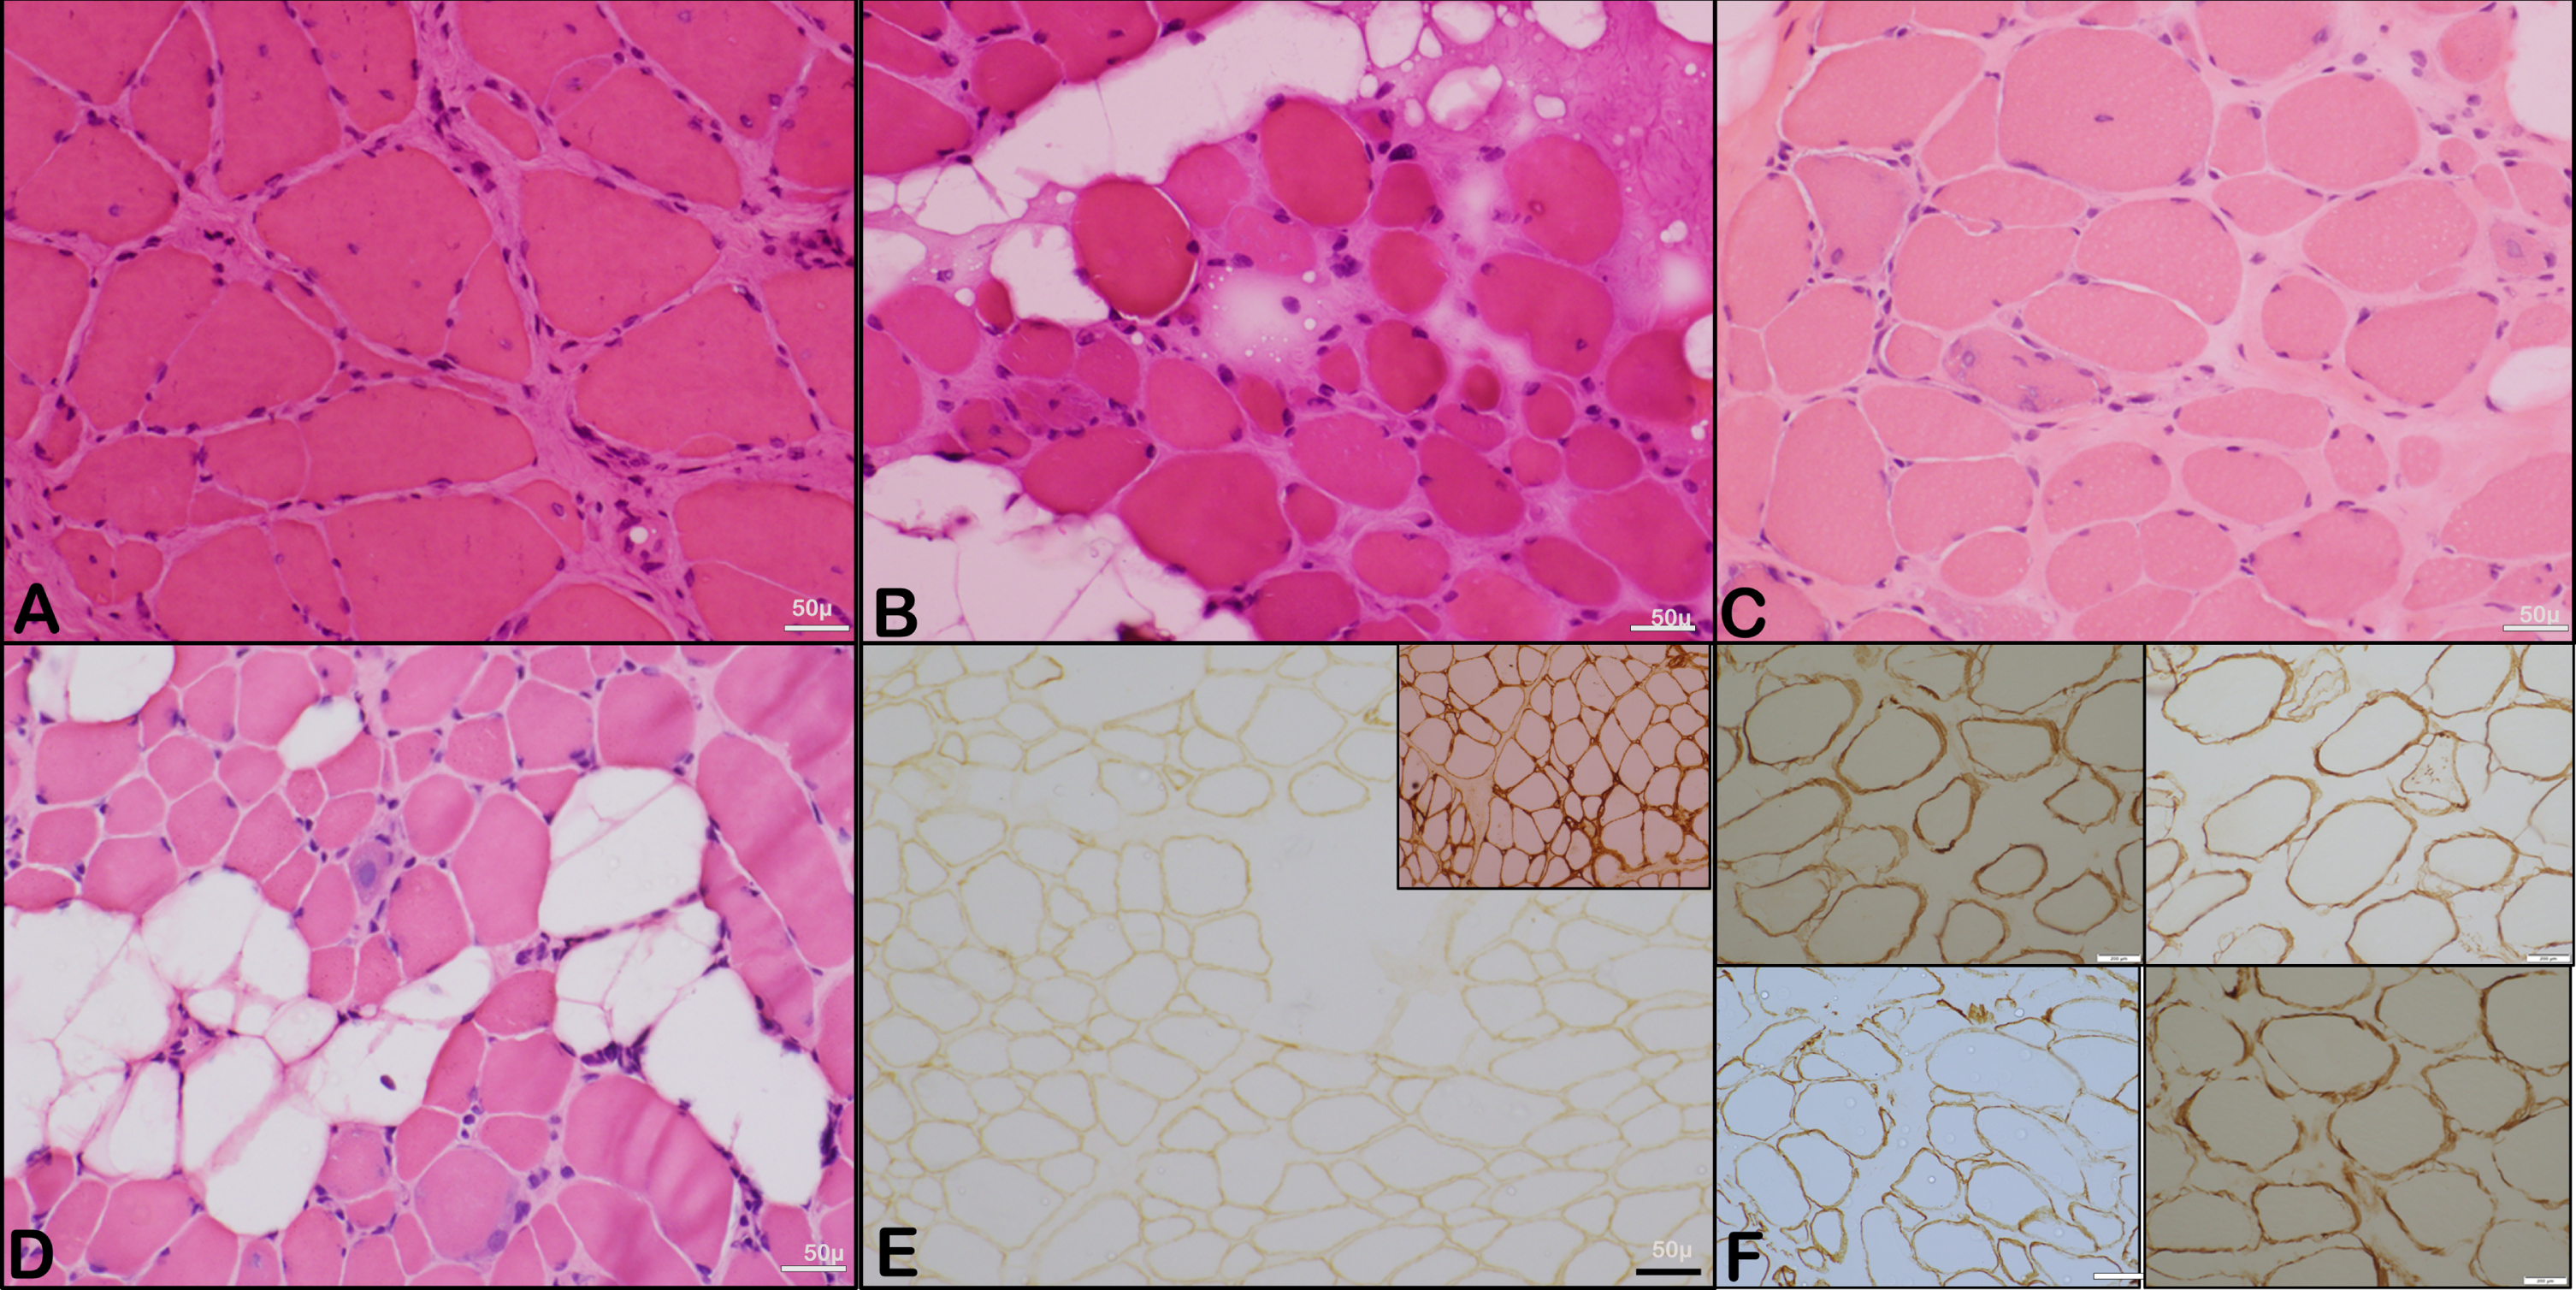 Representative microphotographs showing the histopathological changes. A to D: Representative microphotographs showing variation in fibre size with variable atrophic and scattered hypertrophic fibres with regenerating fibres and evidence of interstitial (endomysial) fibrosis (Transverse section, H & E, X 200). E: Microphotograph showing muscle fibres with reduced expression of merosin (Inset shows control staining) (IHC, X 200). The perimysium is thickened and endomysial fibrosis is observed. F: Representative images of muscle immunohistochemistry (Alpha, Beta, Gamma and Delta Sarcoglycan; IHC x 200).